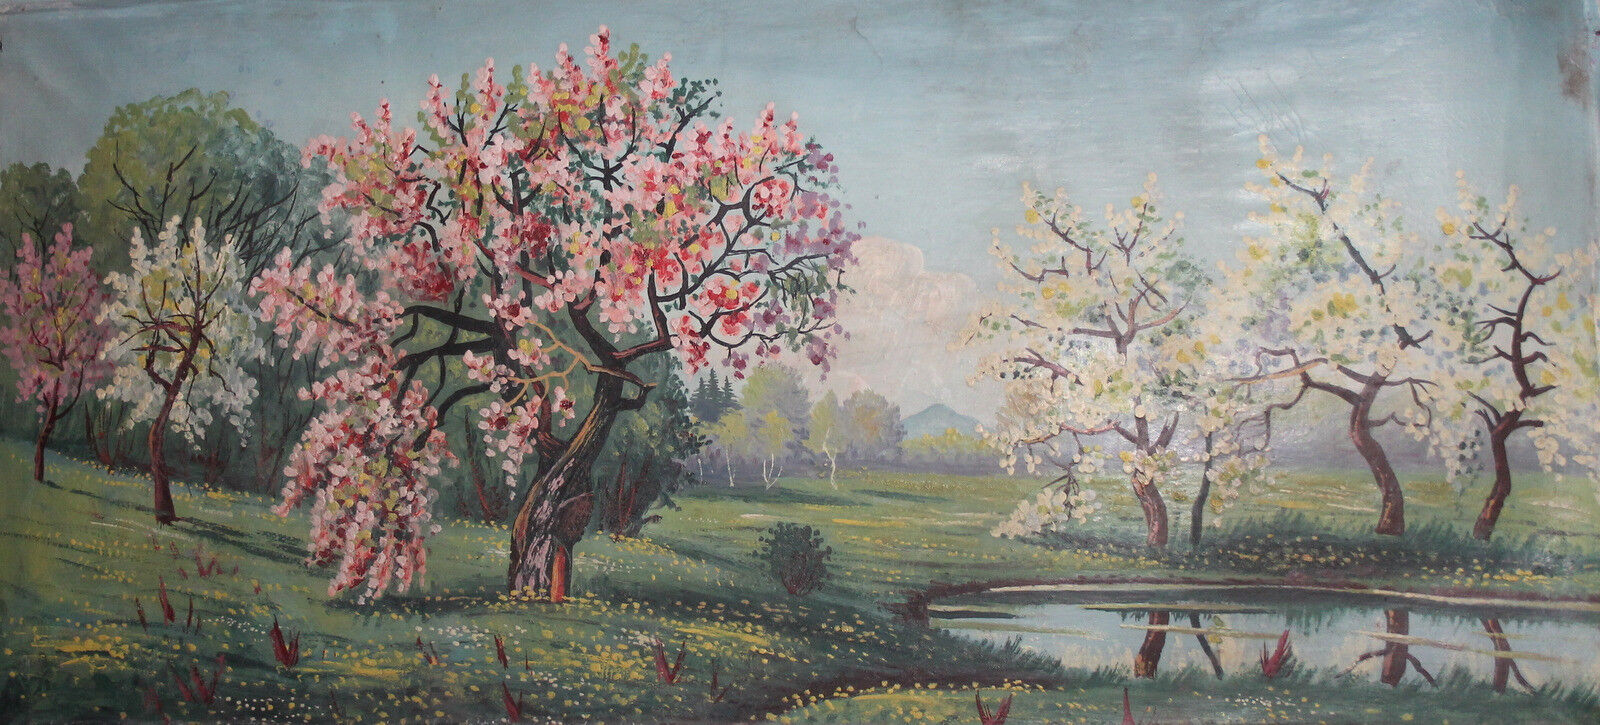 Antique European spring landscape signed Cheap mail order shopping painting Now on sale large oil